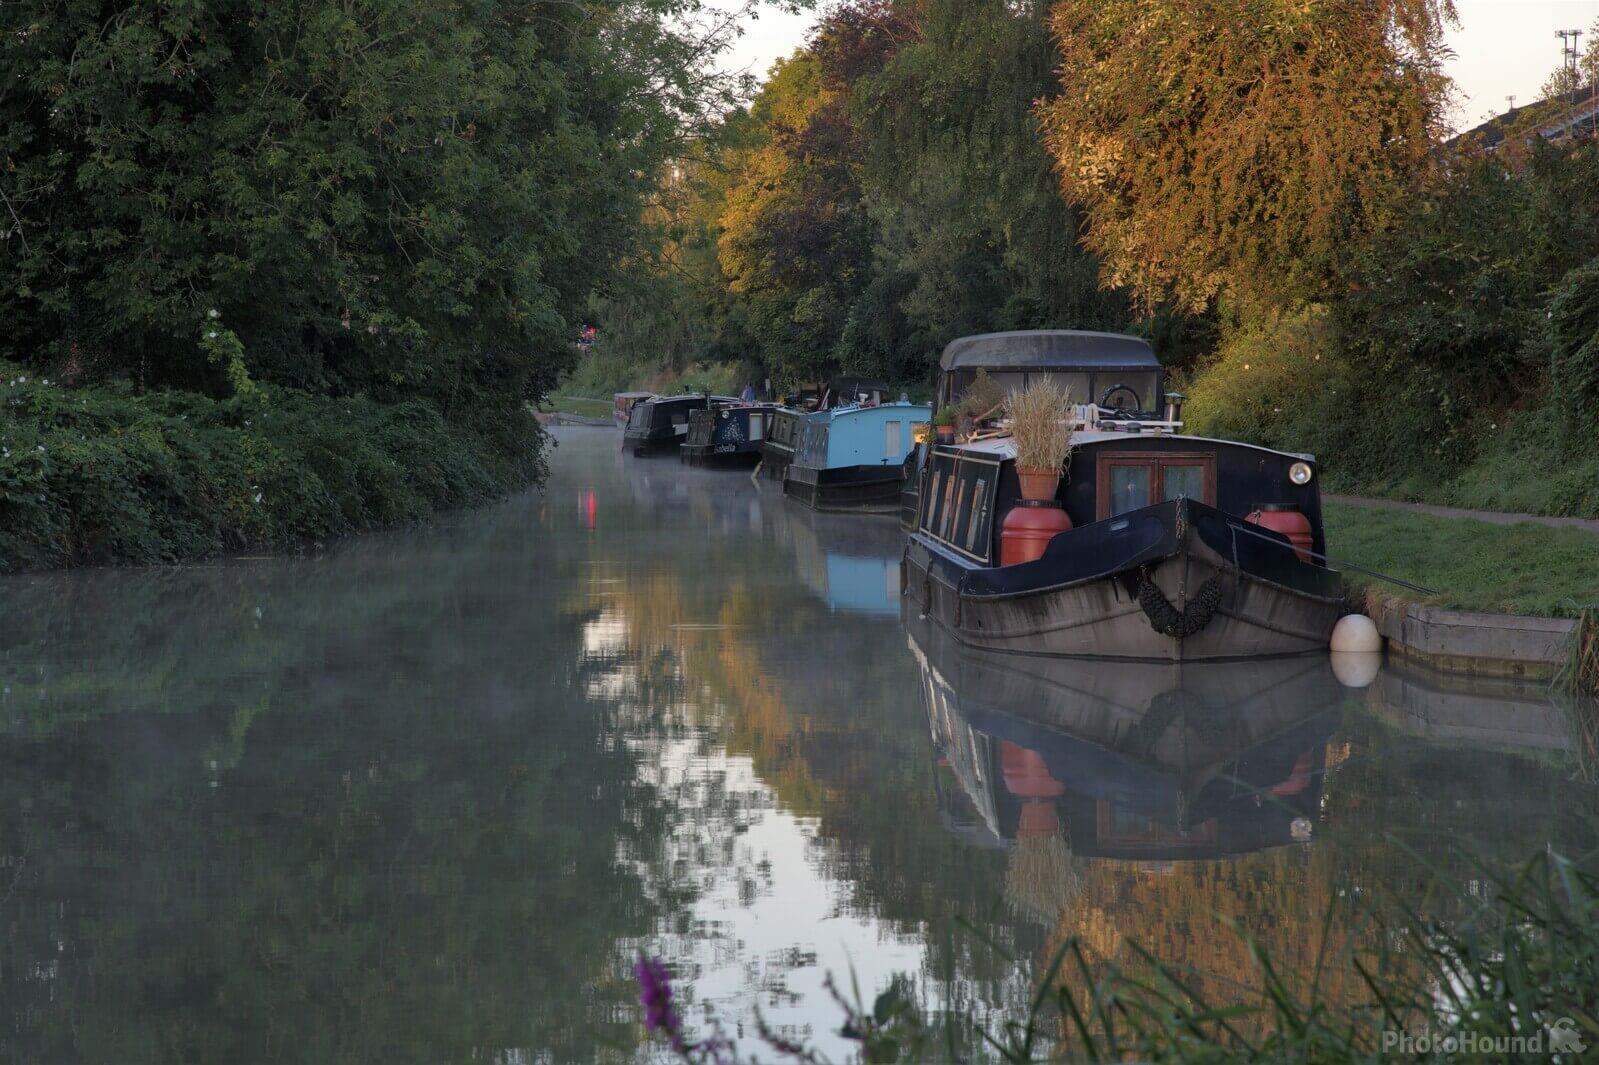 Image of Kennet and Avon Canal Centre  by michael bennett